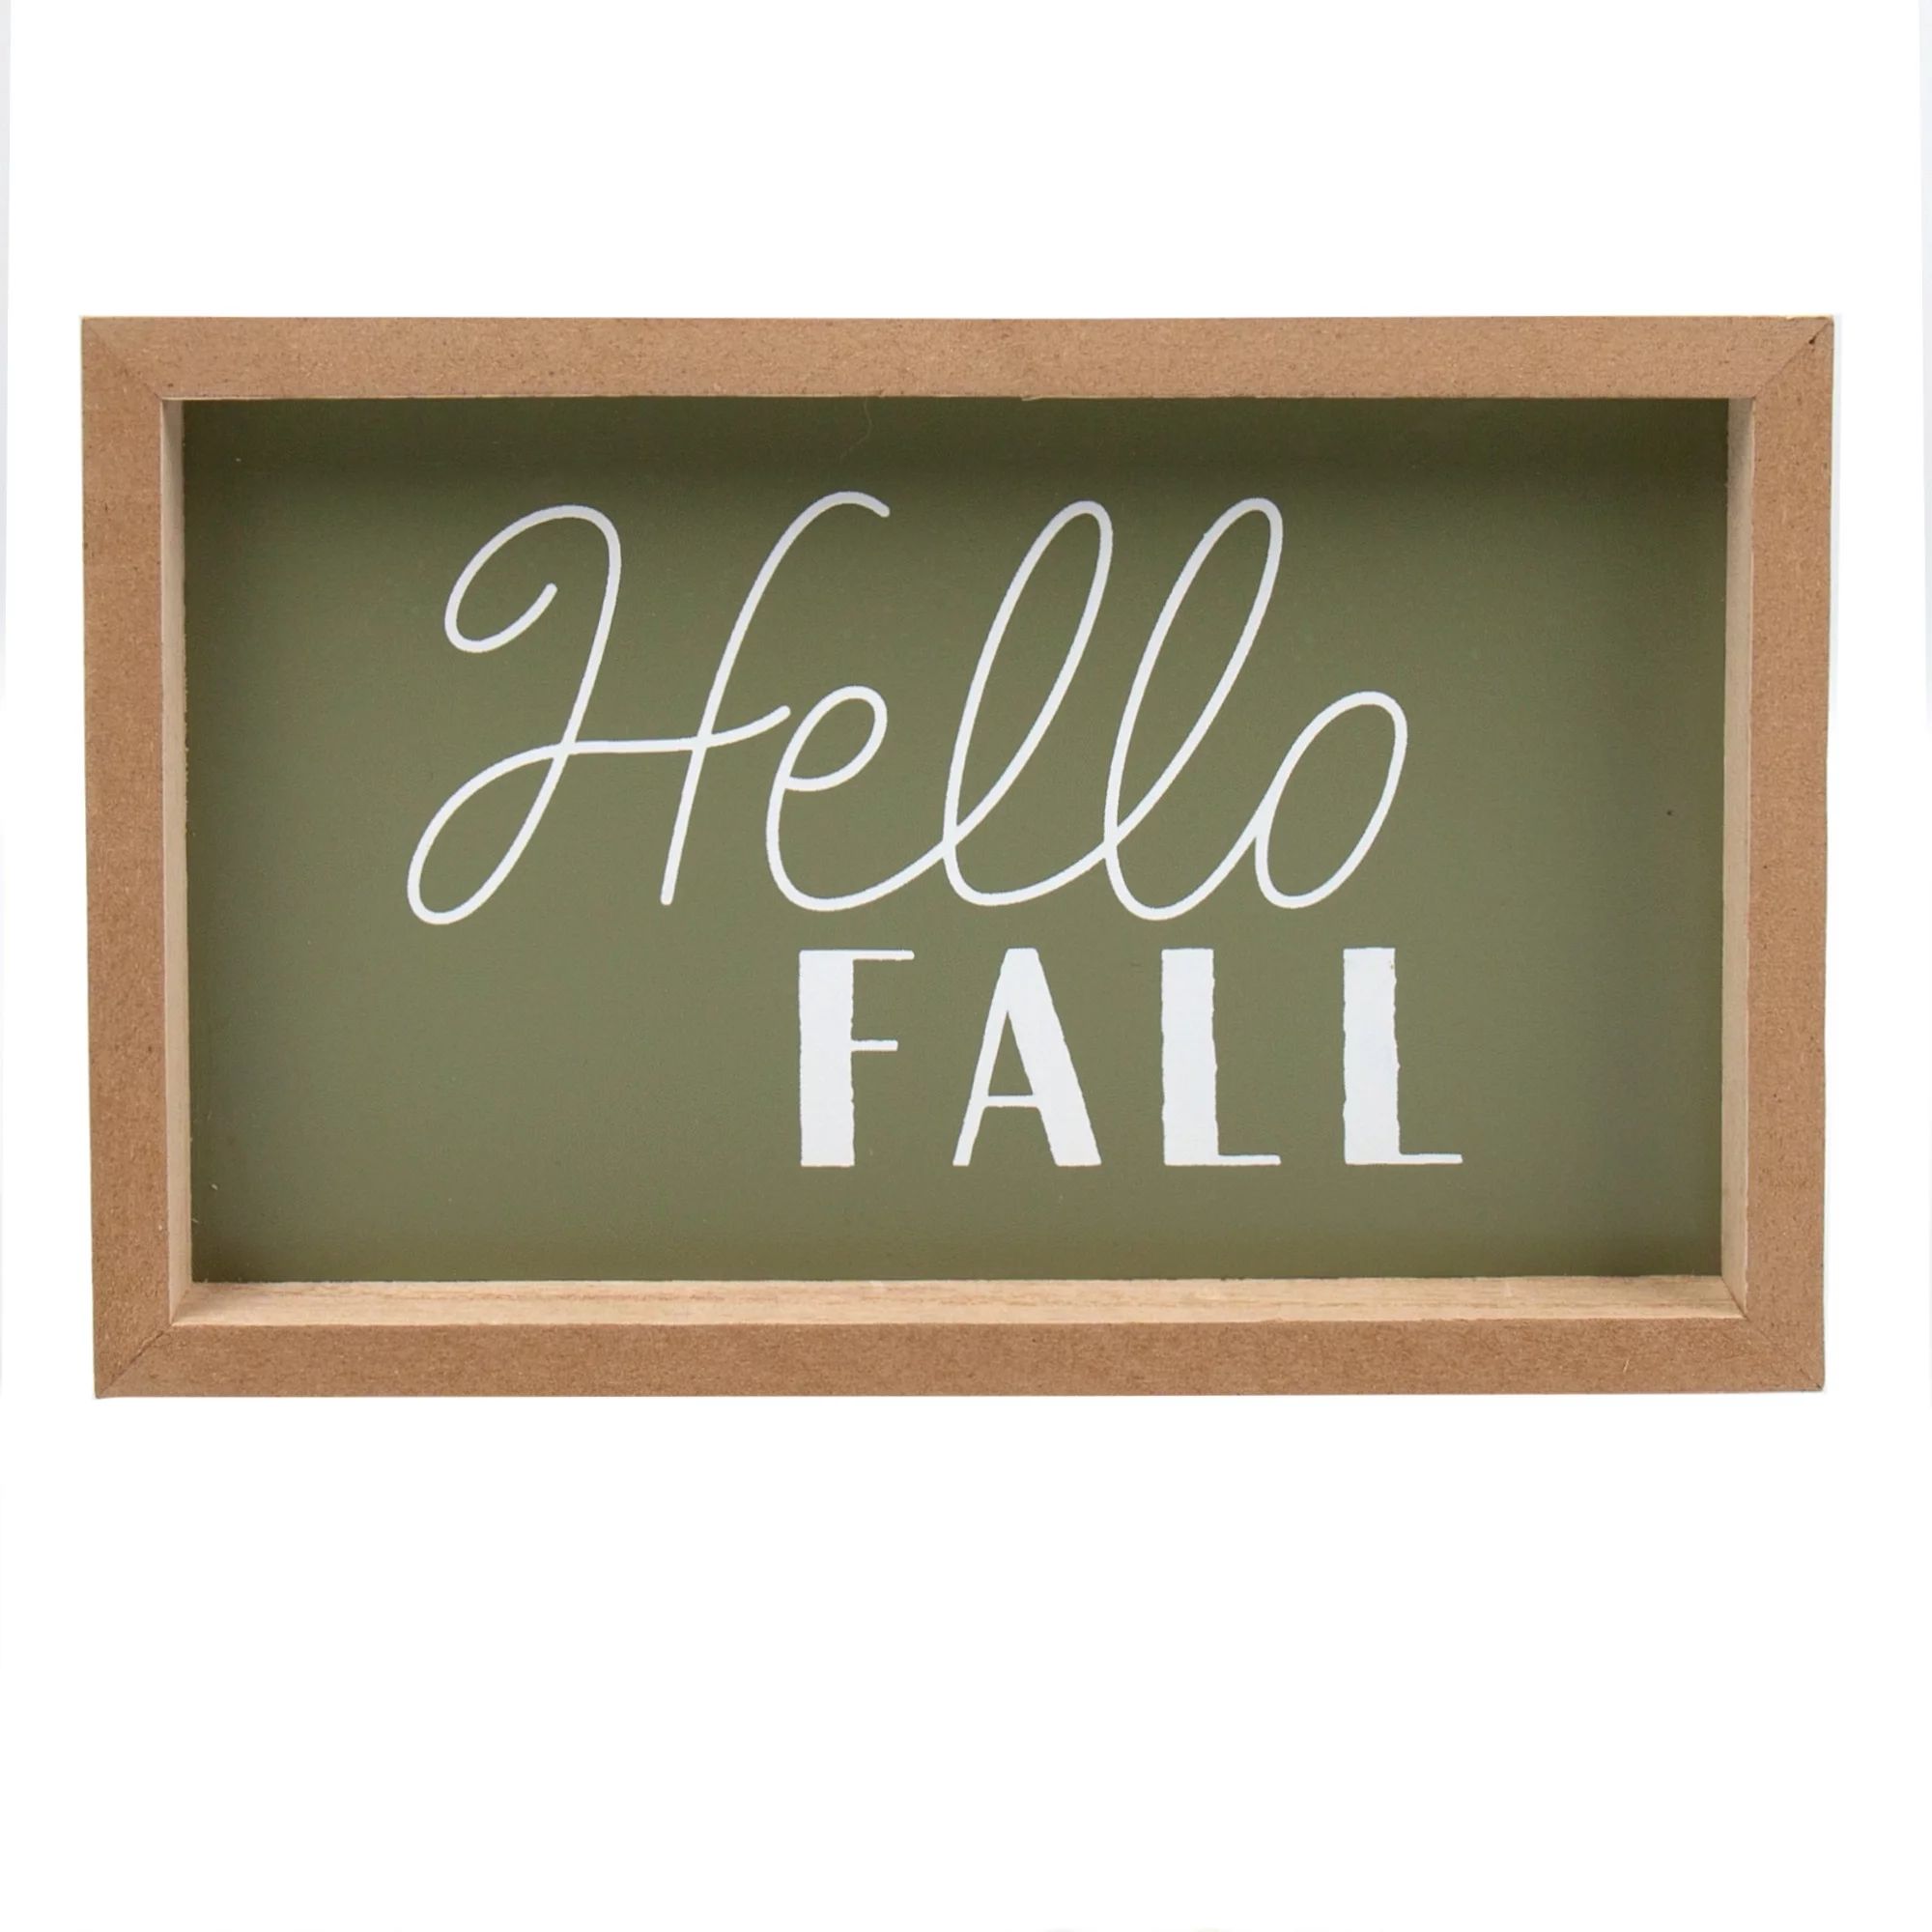 Reversible Multicolor Tabletop Sign, Hello Fall & Leafy Sidewalks Shadowbox, by Way To Celebrate | Walmart (US)